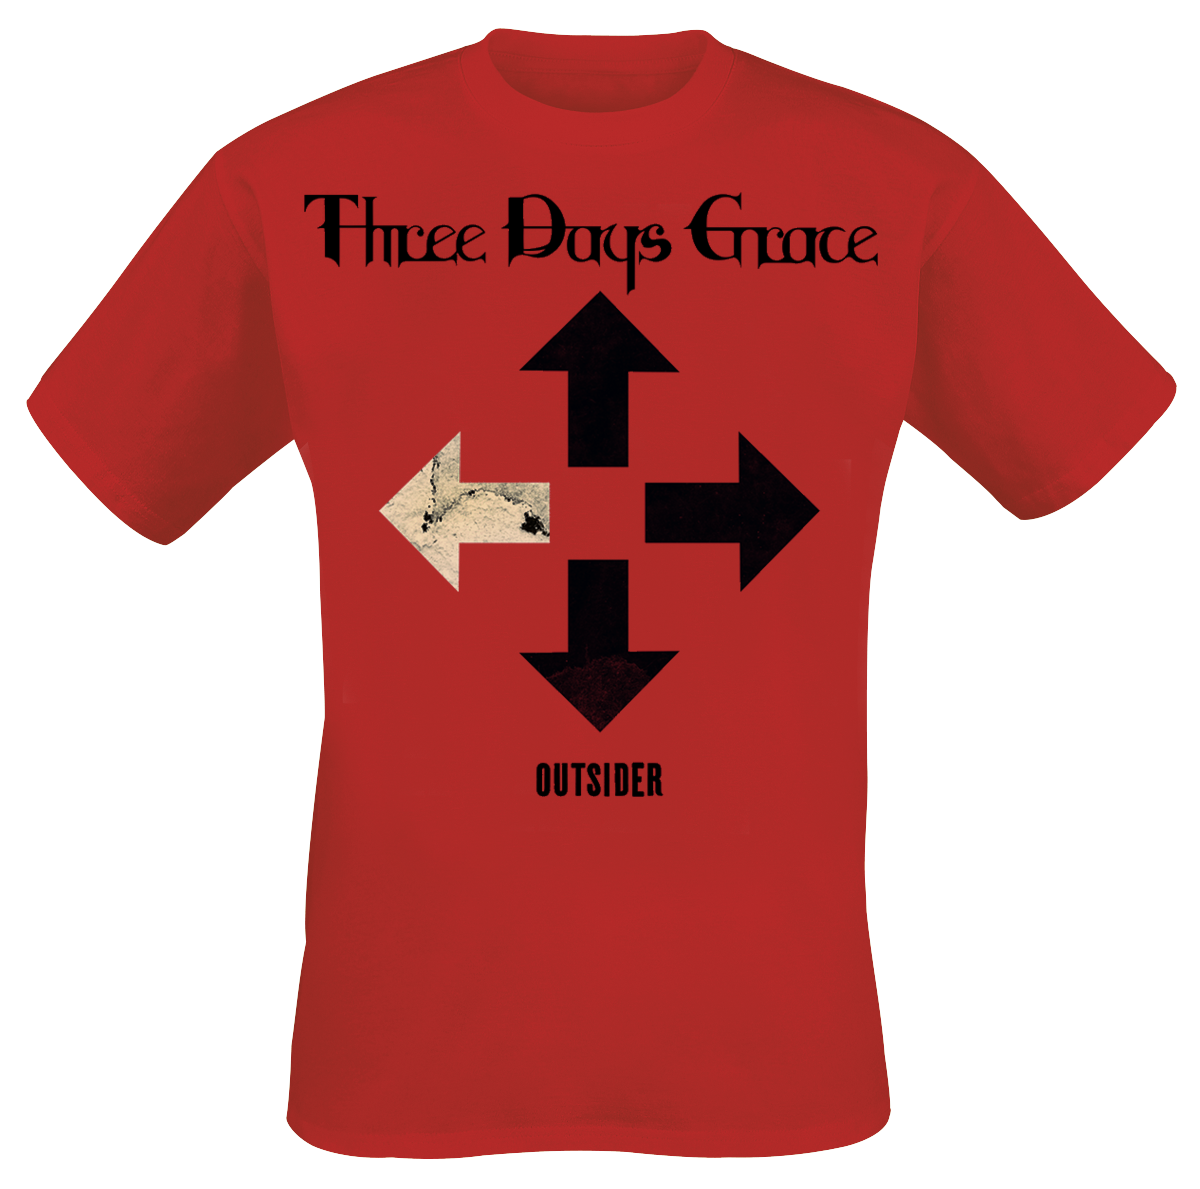 Three Days Grace - Outsider - T-Shirt - red image